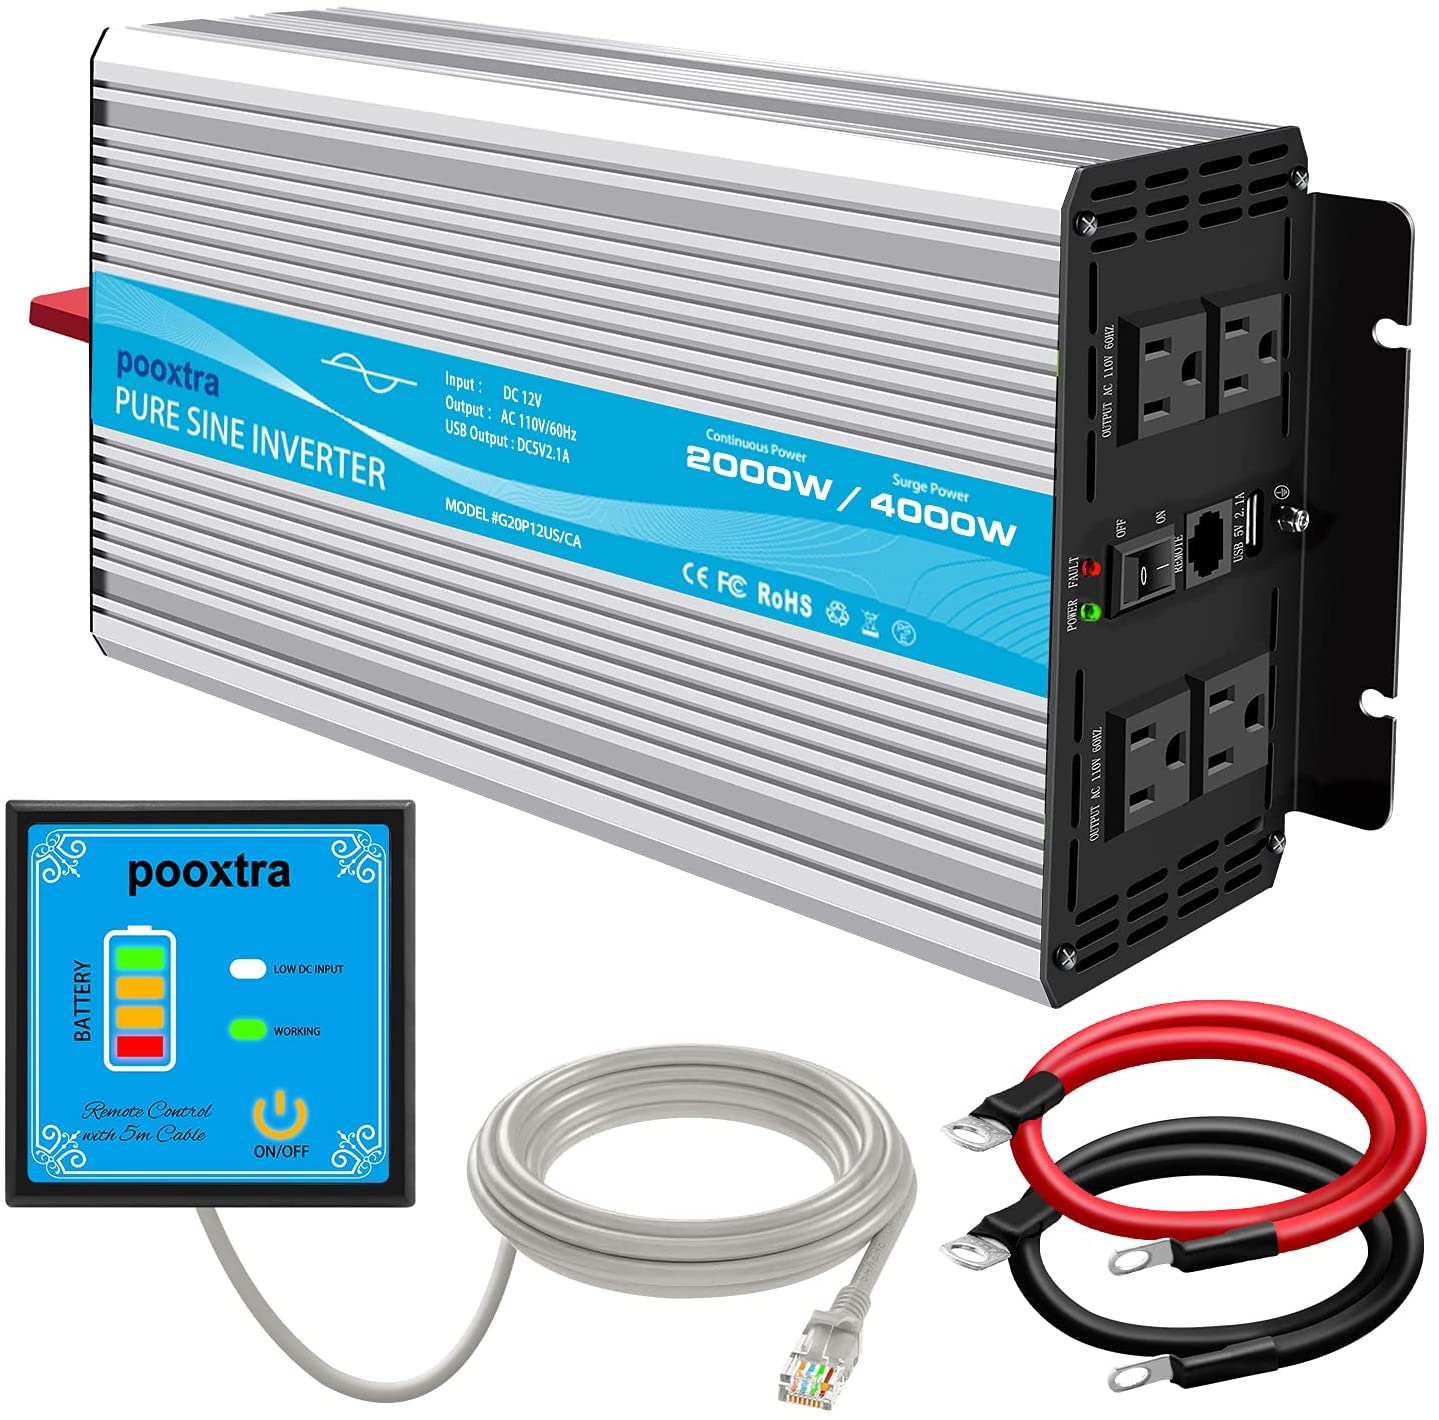 Pooxtra 2000 watt Pure Sine Wave Inverter DC 12V to 110V Power Inverter with 4 AC Outlets ,2.1A USB Ports and 16.4ft Remote Control